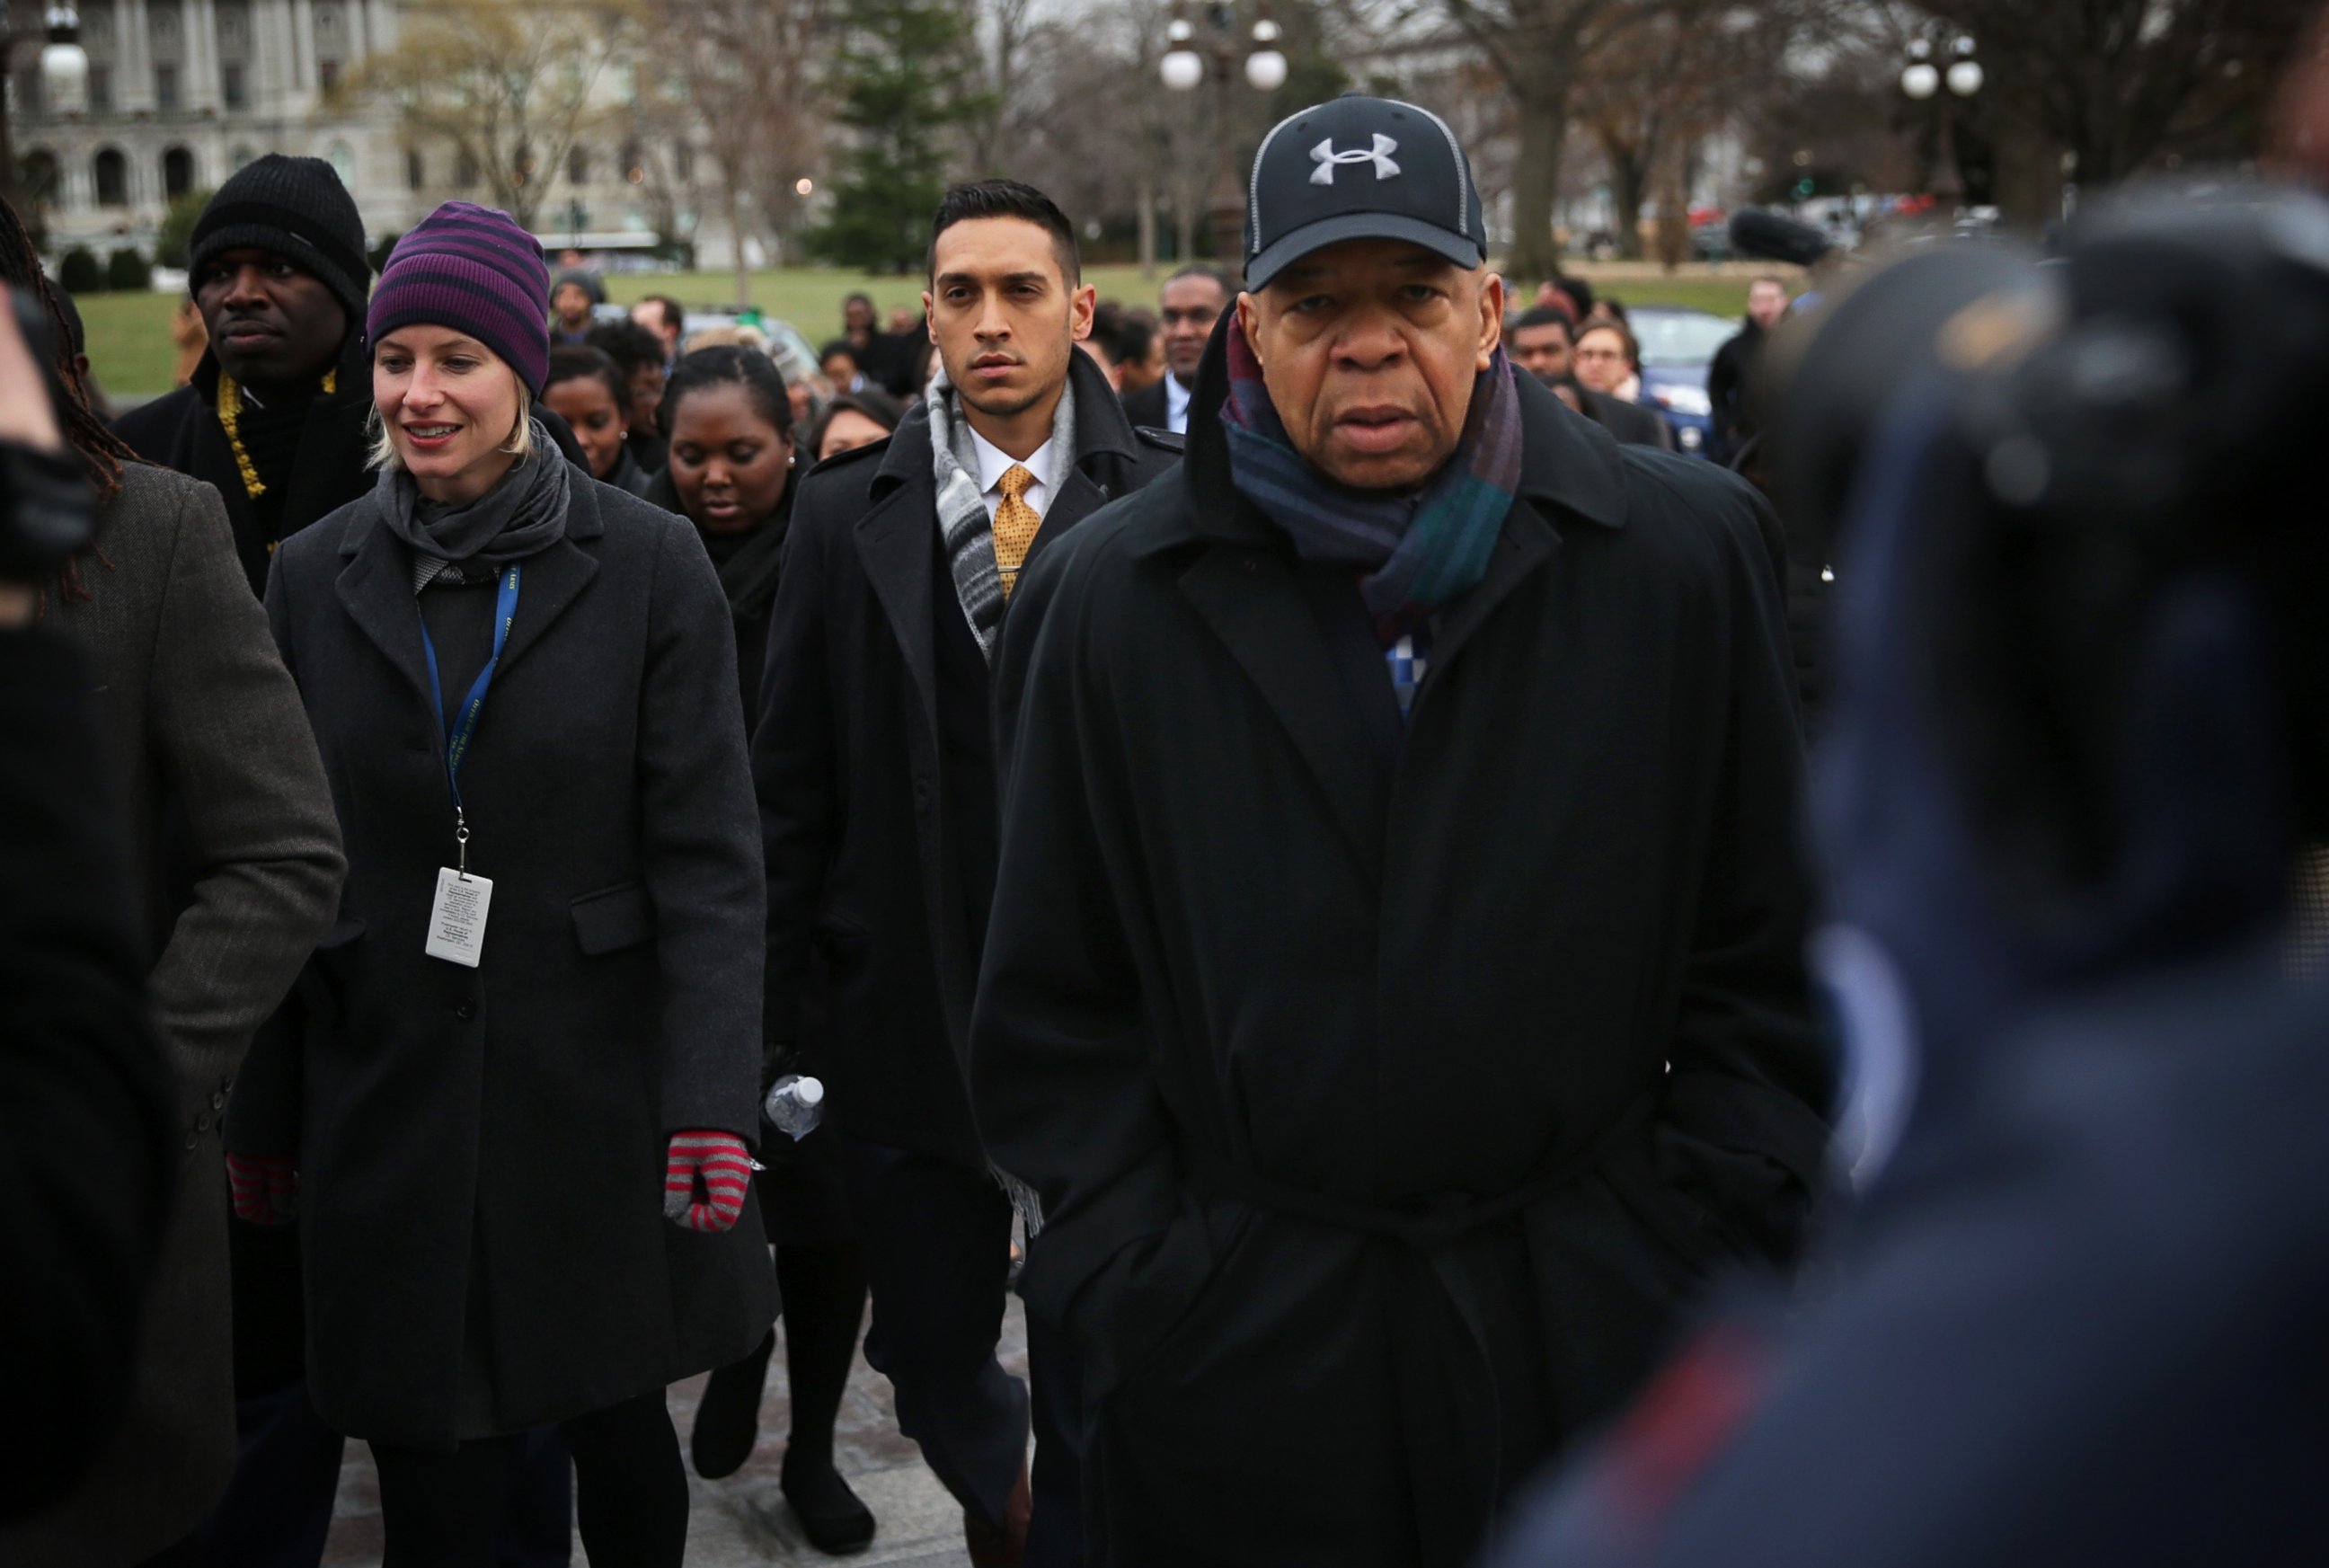 PHOTO: Rep. Elijah Cummings joins black congressional staffers during a walkout on the steps of the U.S. Capitol in Washington, DC on Dec. 11, 2014.